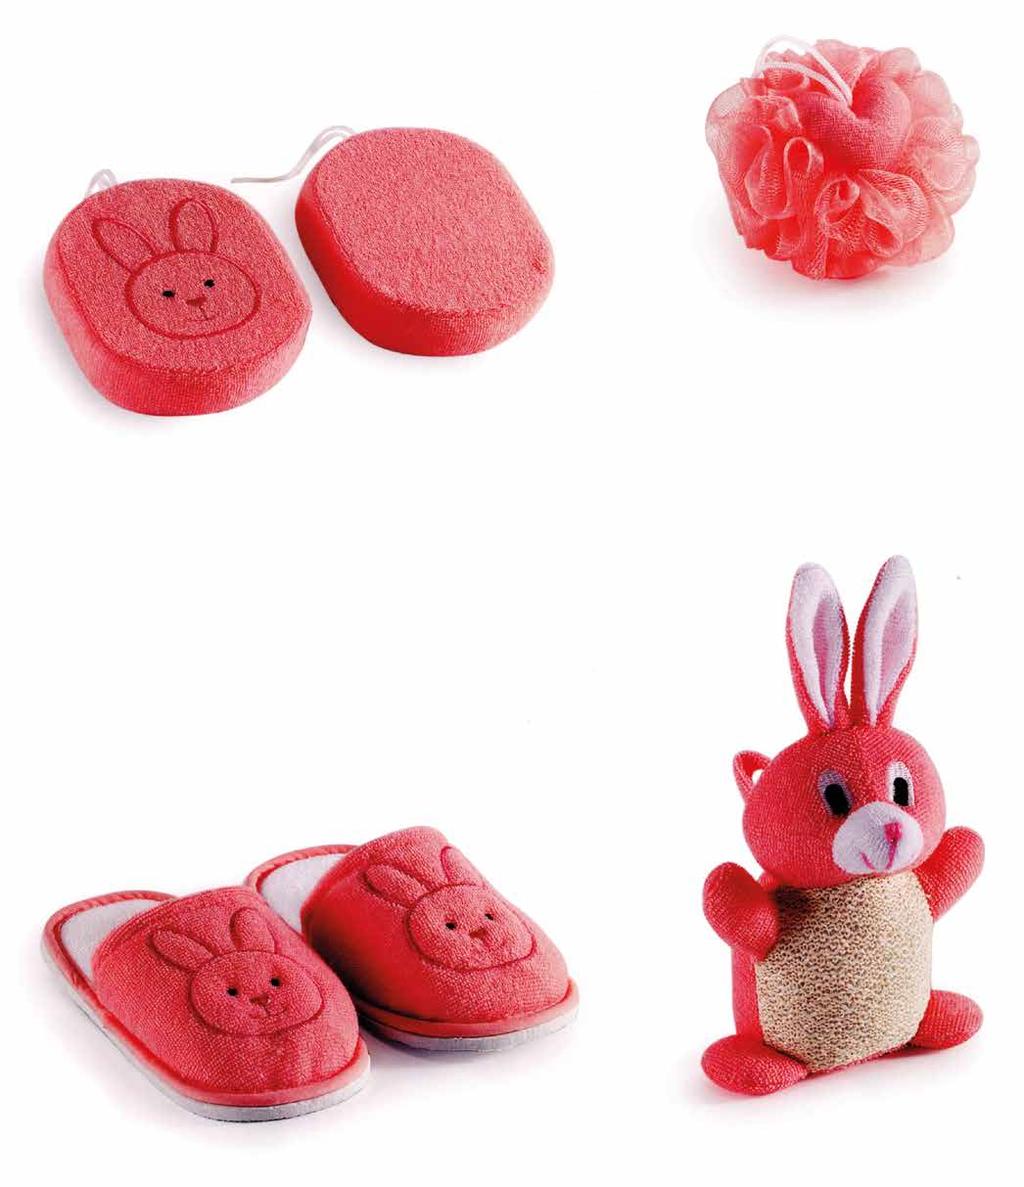 50 Bath Products Bath puff with heart CTS-007-20 25g Fine towel cloth bath sponge with embroidered rabbit CTS-006-20